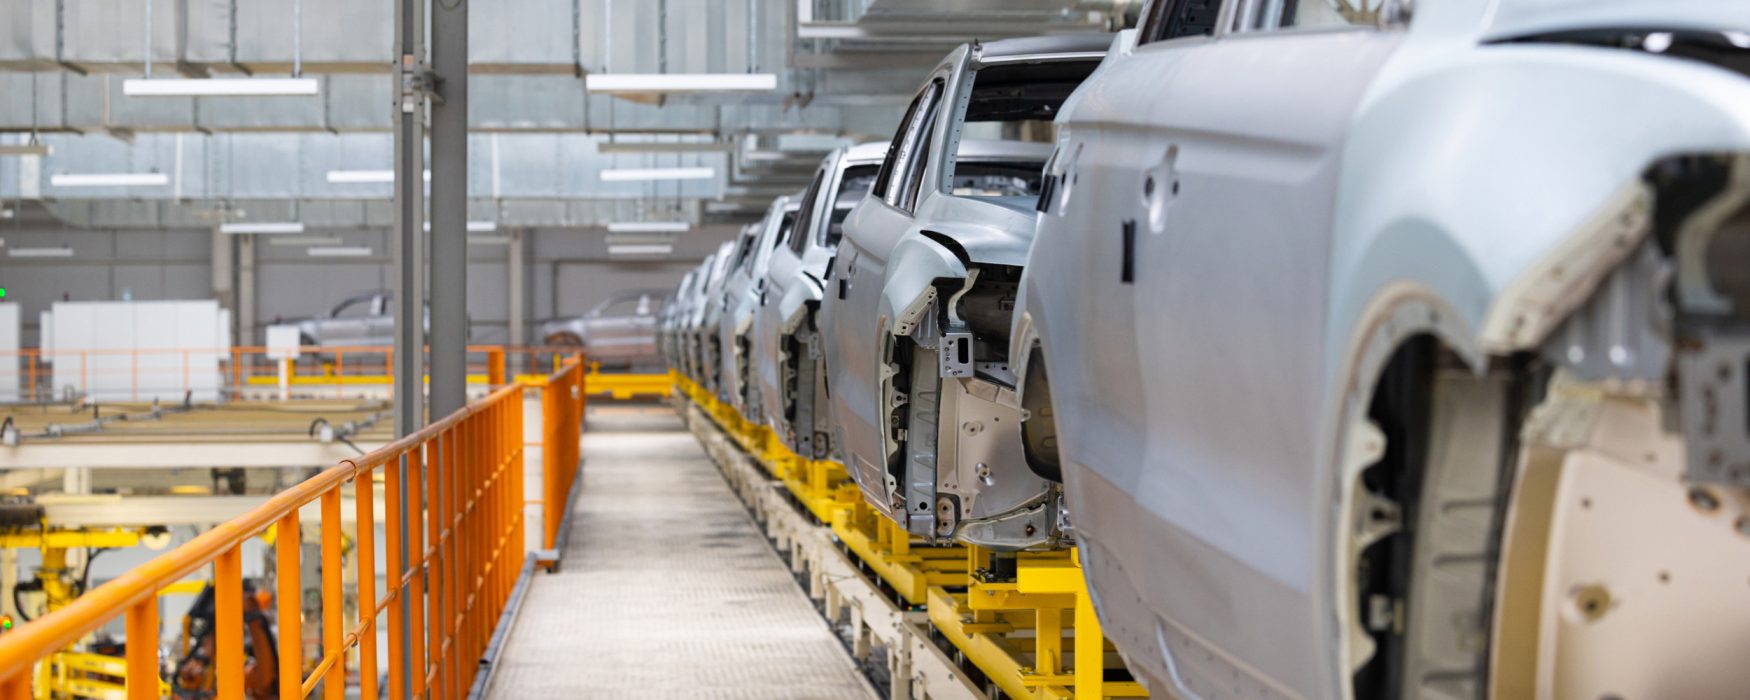 Image of automobiles moving through an assembly line